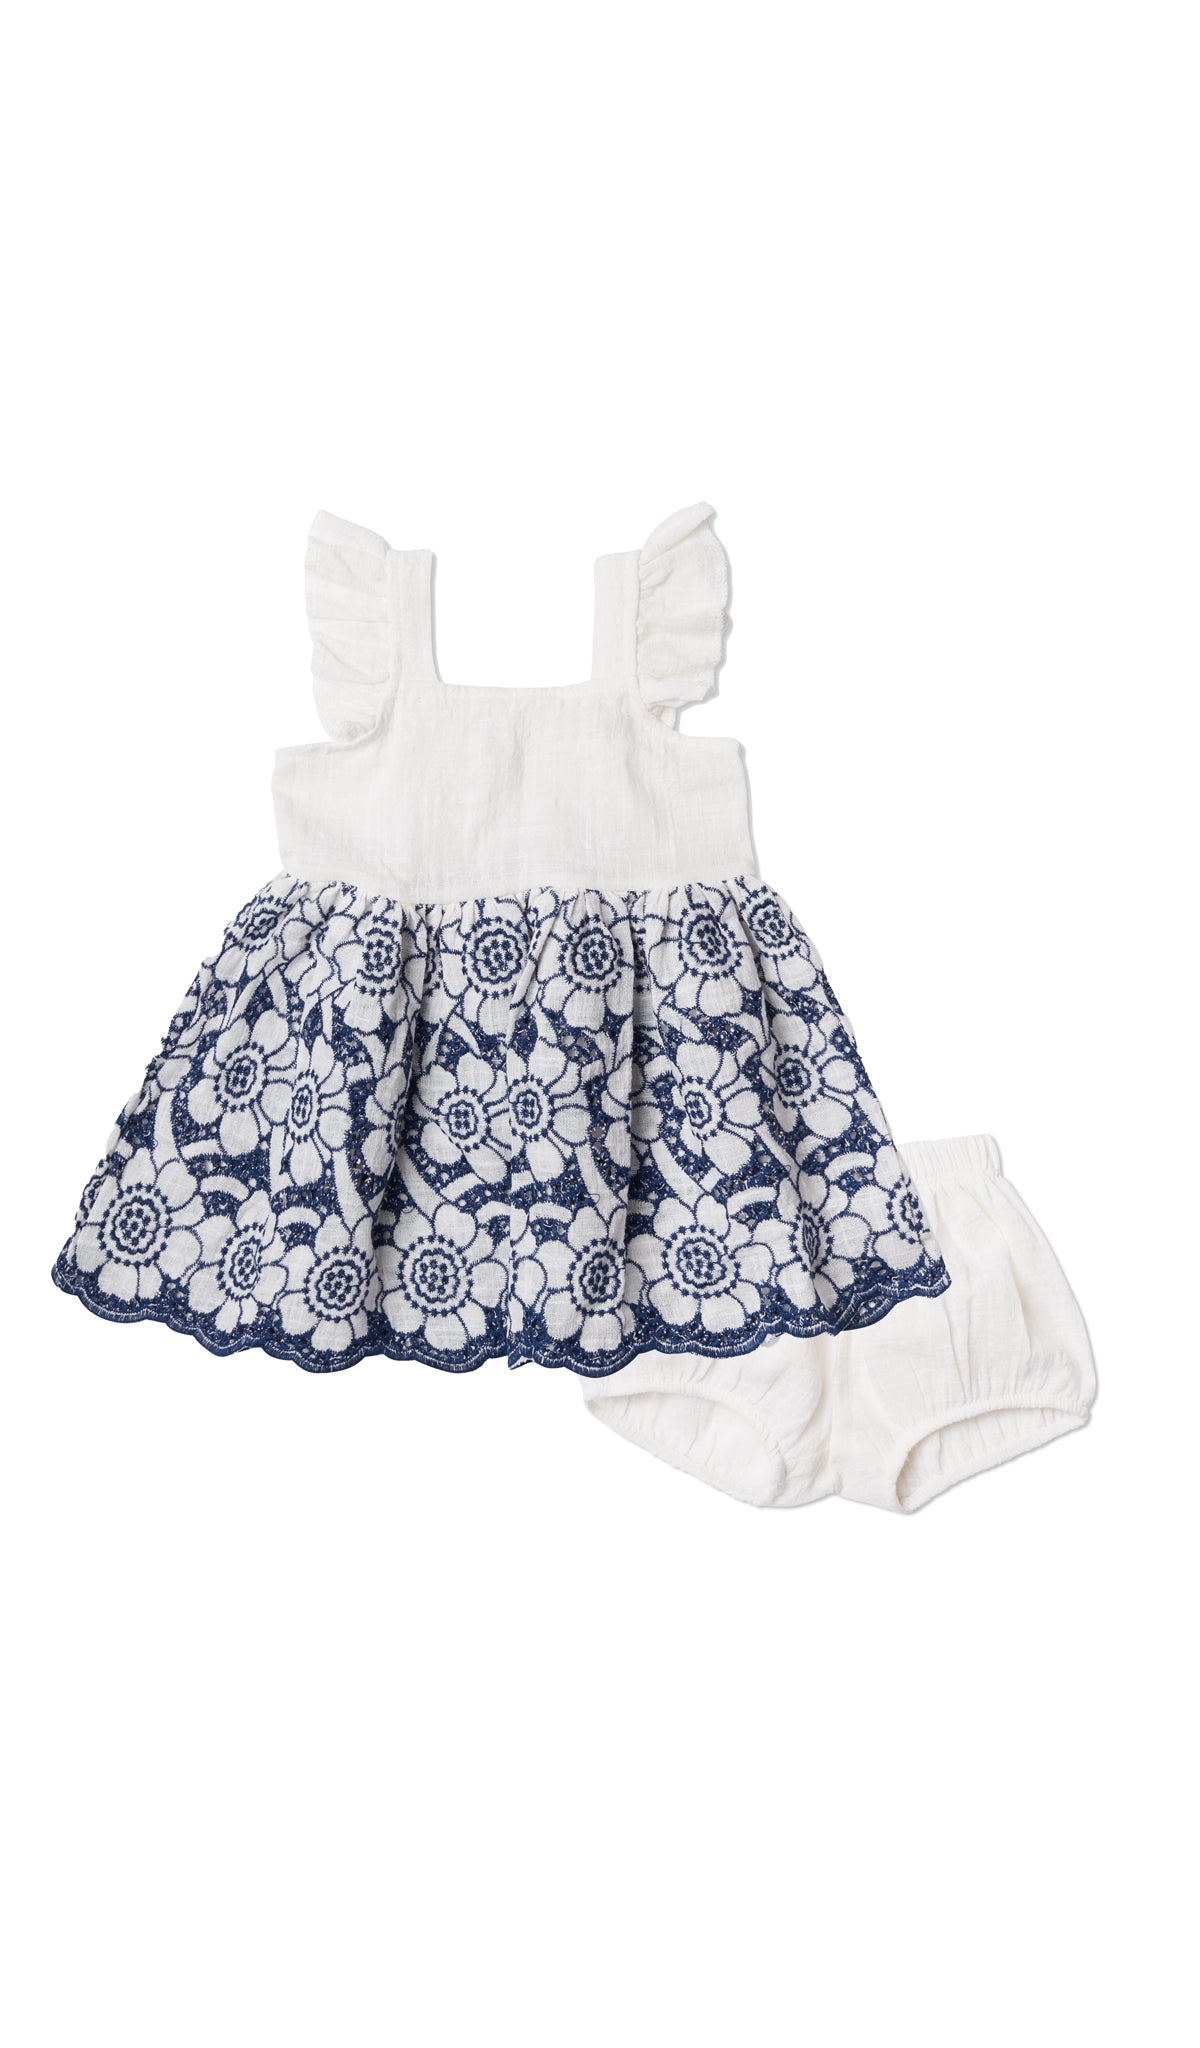 Ivory/Navy Eyelet Baby Dress. Flat shot of eyelet dress laying over the matching diaper cover.